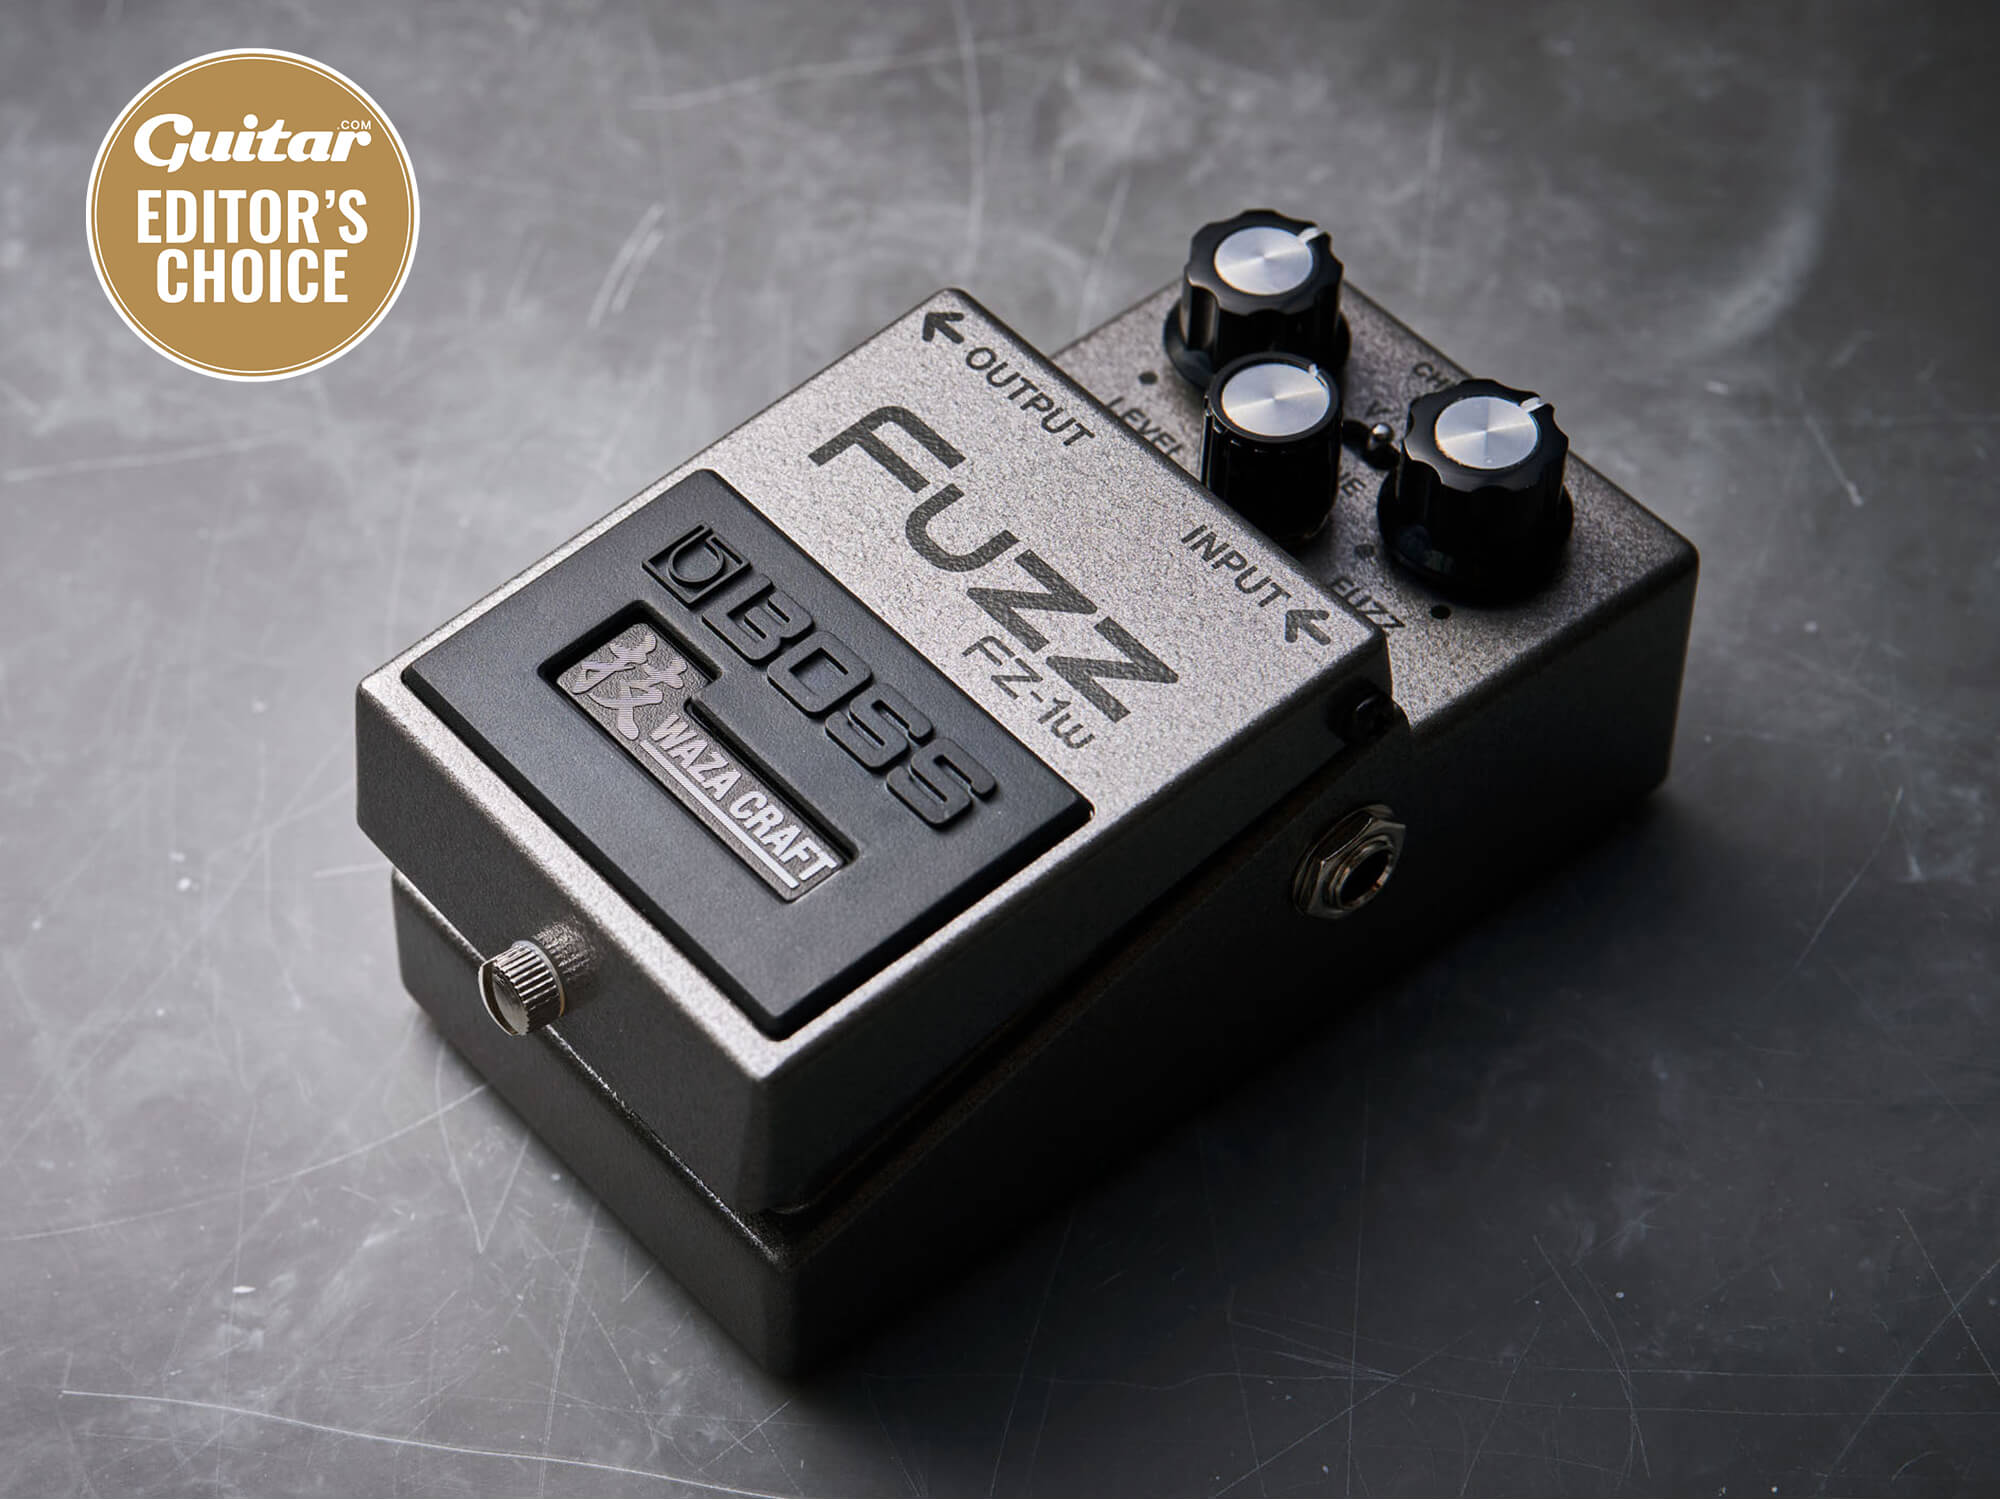 Boss FZ-1W Fuzz review: a new addition to the Boss fuzz